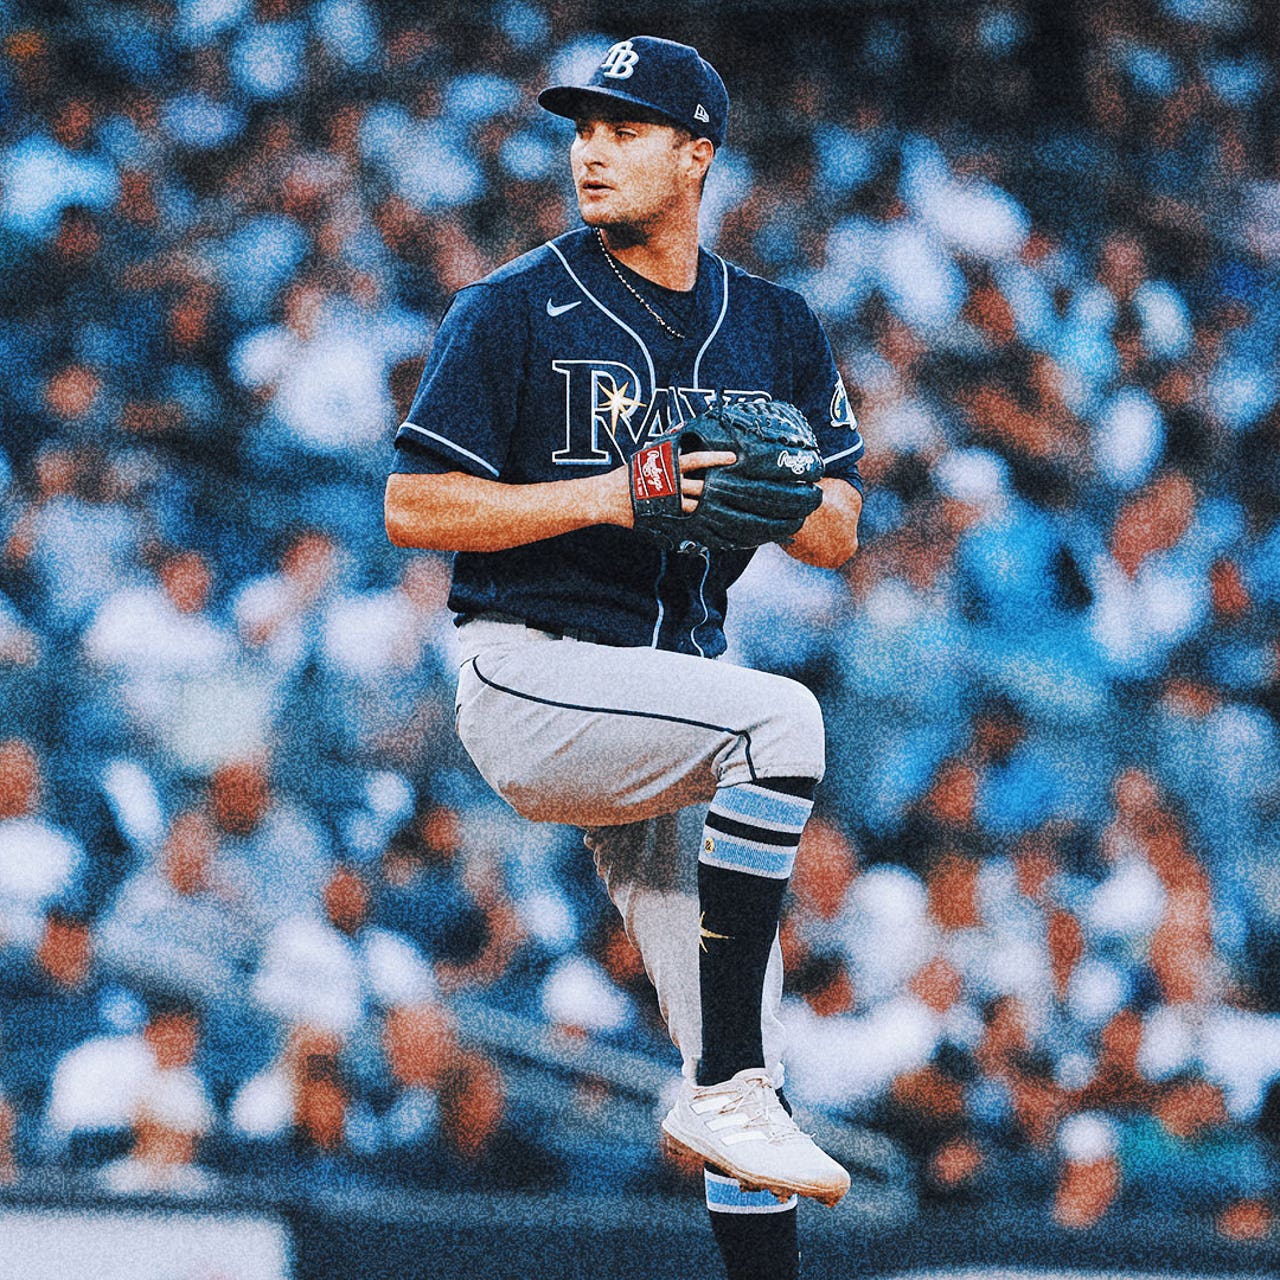 Rays All-Star pitcher Shane McClanahan out for season